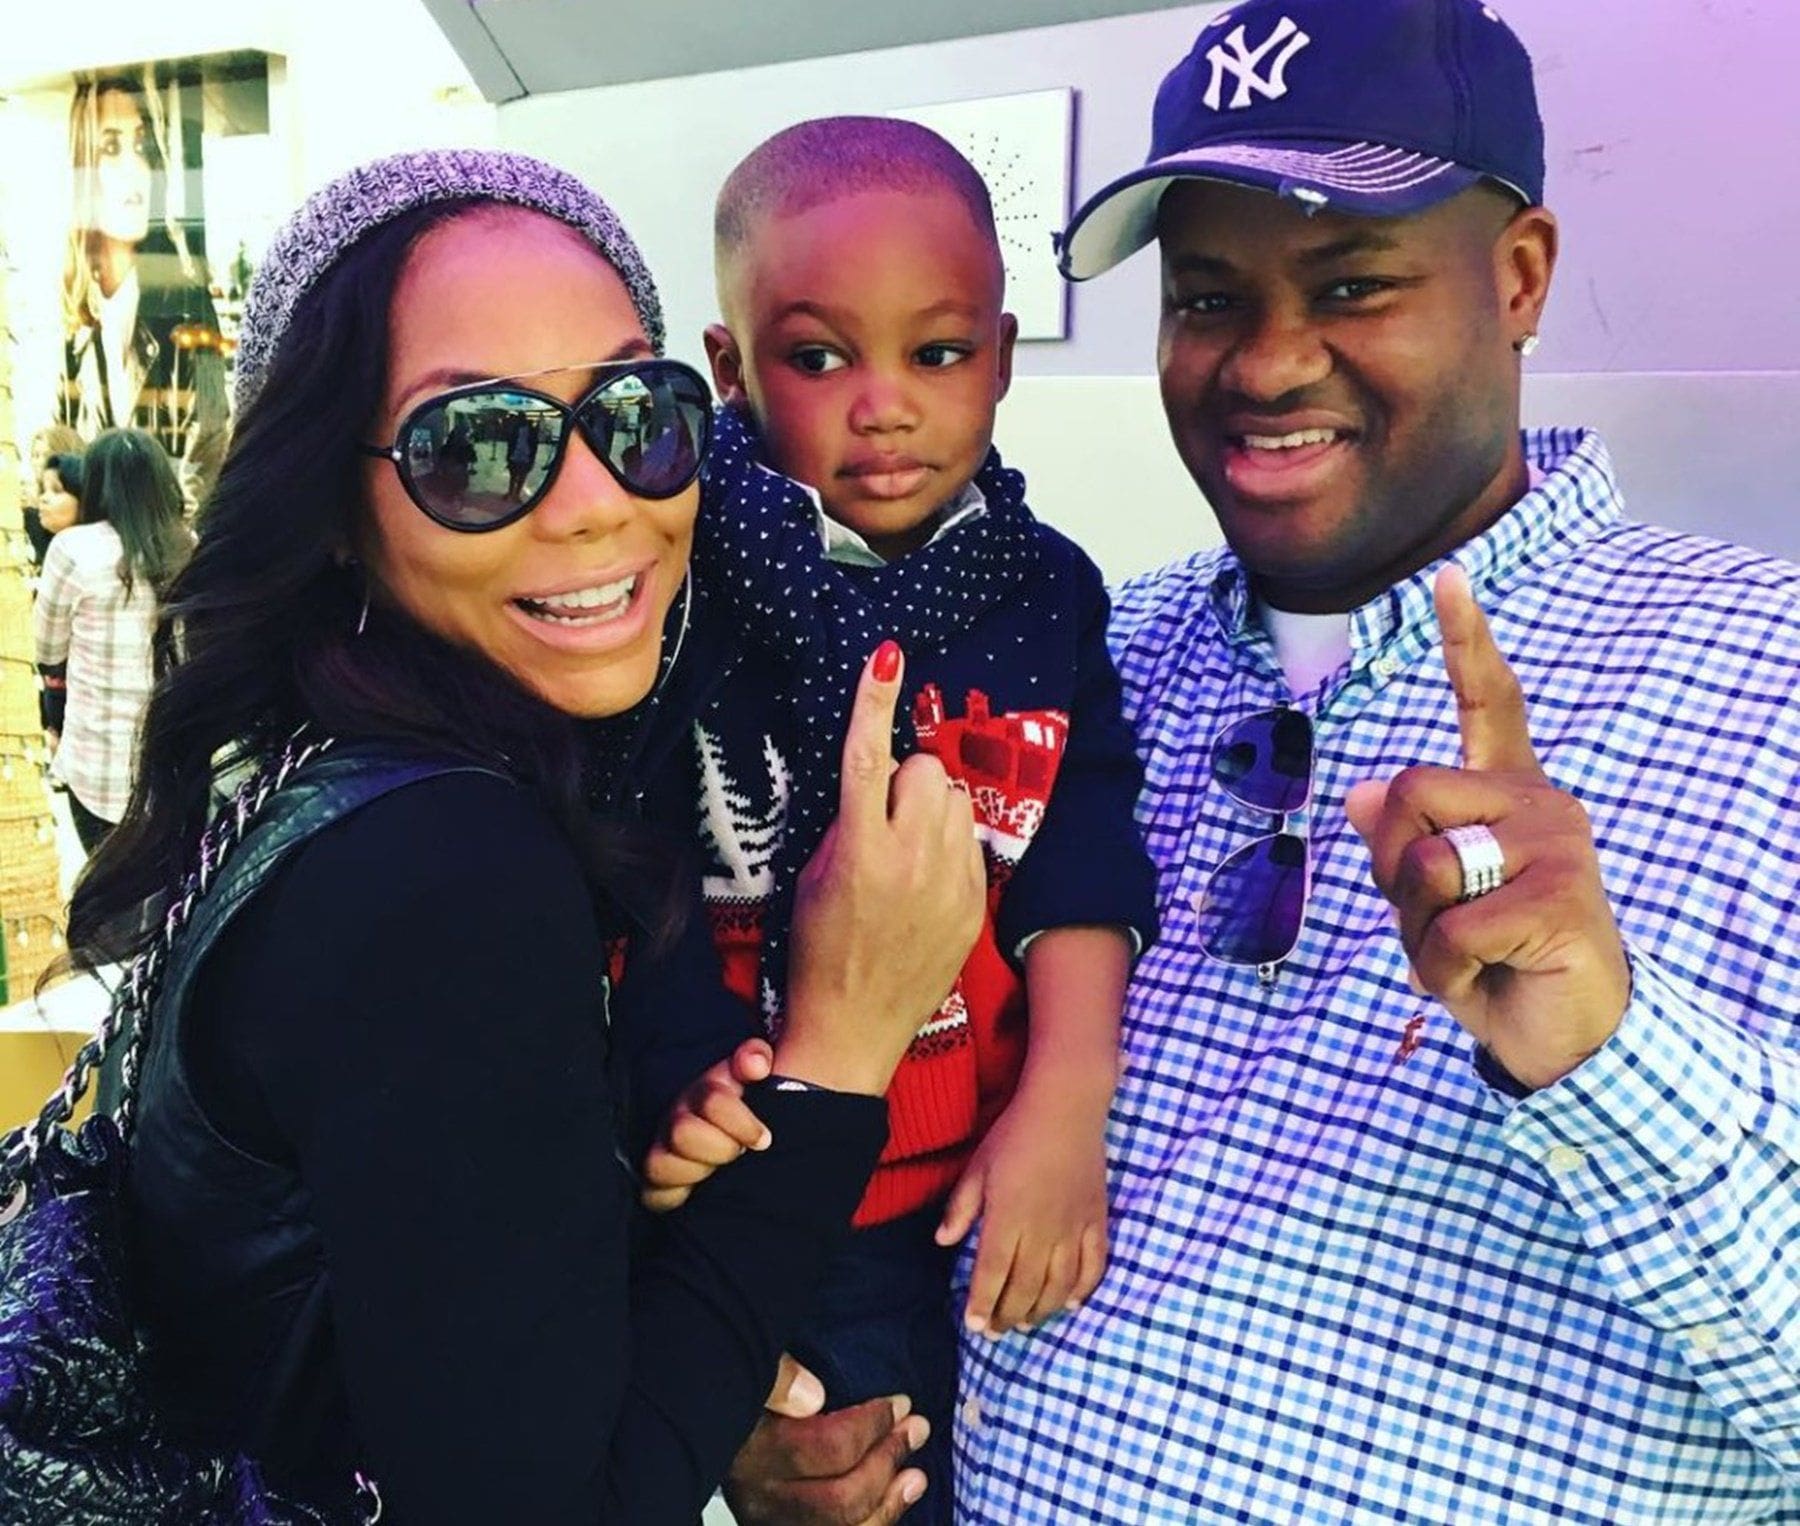 Tamar Braxton And Vincent Herbert Celebrate Their Boy Logan's Kindergarten's Graduation - Here's Why People Assume Tamar's BF Took The PicsSee The Video And Pics